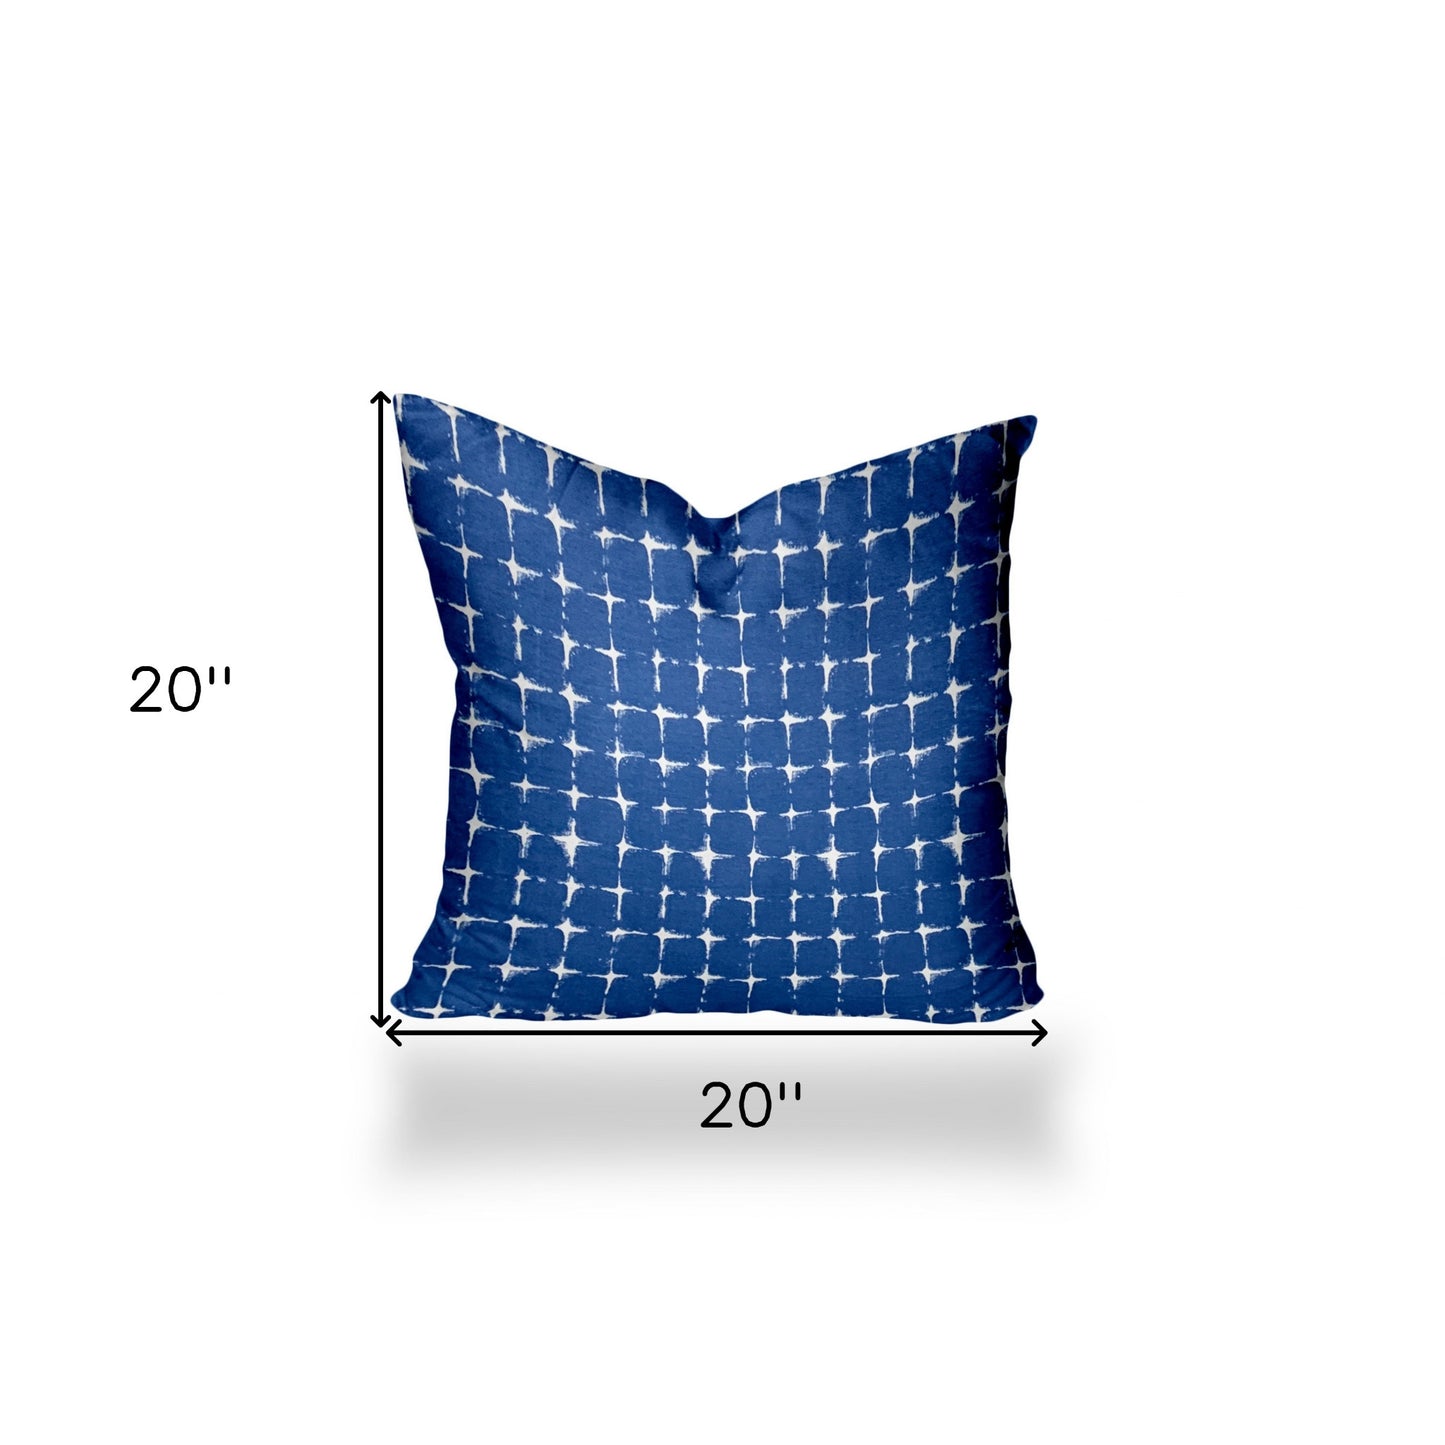 20" X 20" Blue And White Enveloped Gingham Throw Indoor Outdoor Pillow